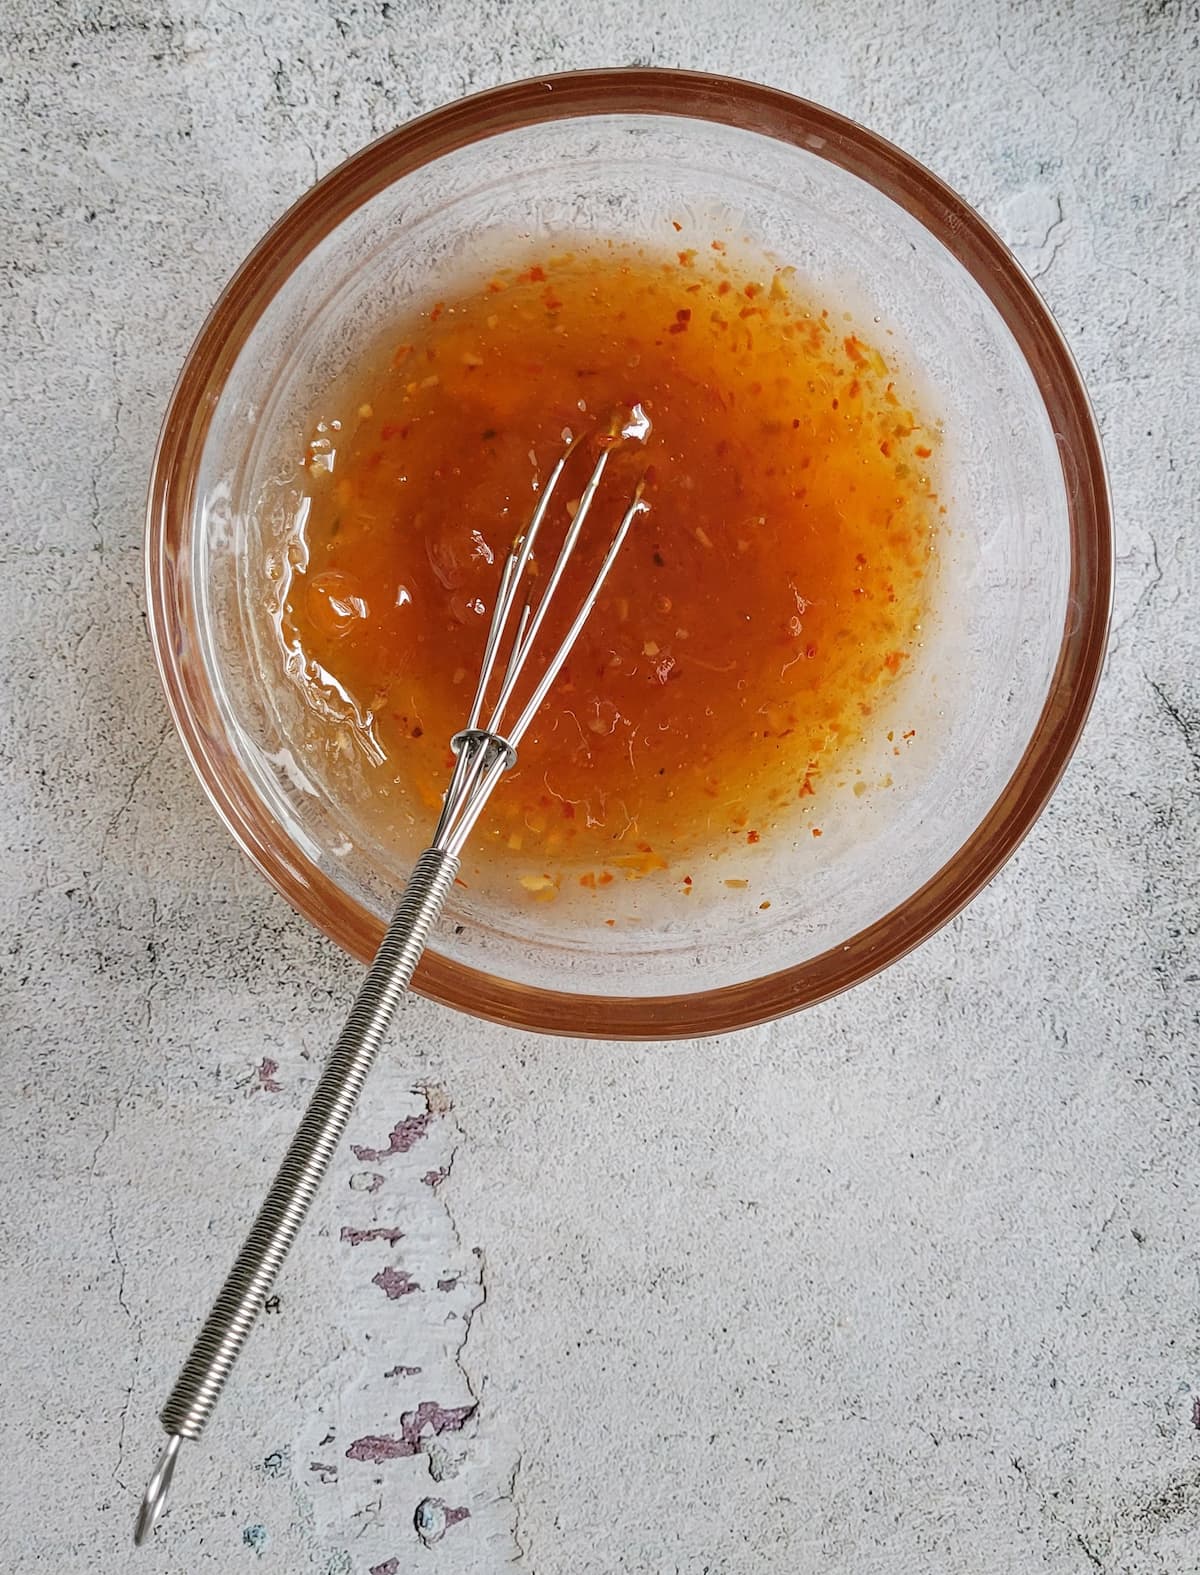 orange sauce in a bowl with a little whisk